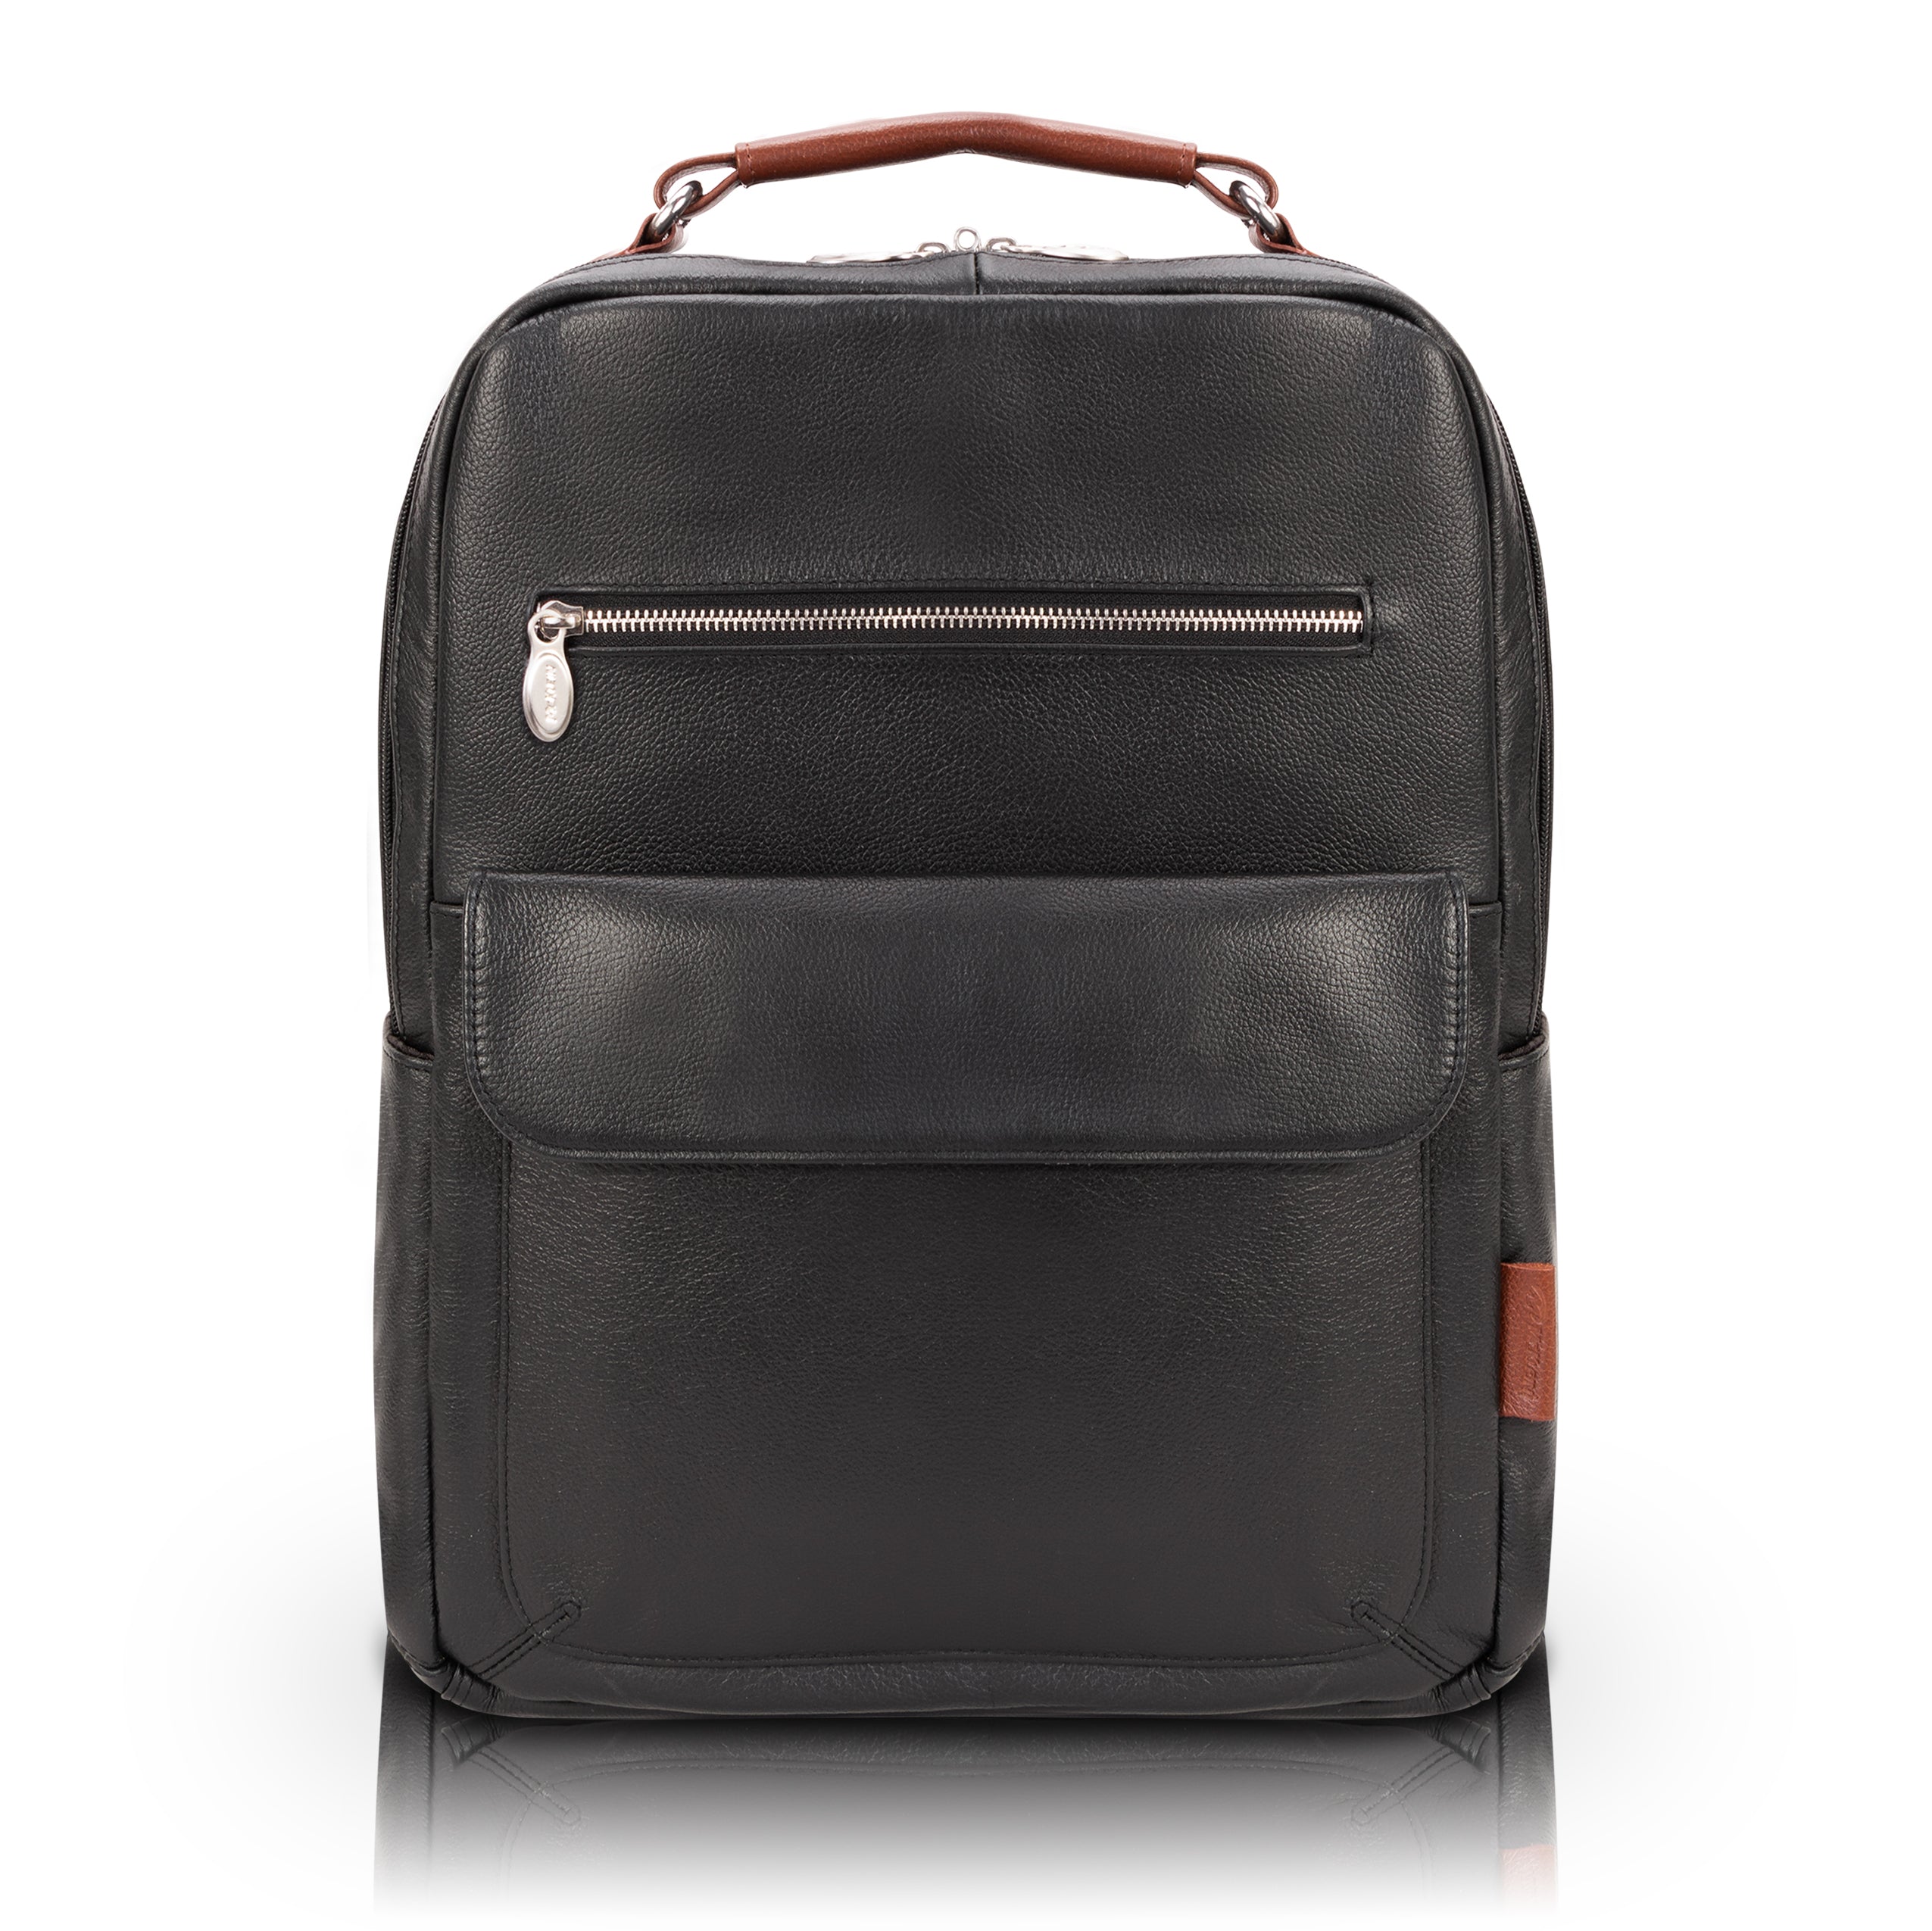 McKlein Southport 17 Leather, Two-Tone, Dual-Compartment, Laptop & Tablet Briefcase Brown